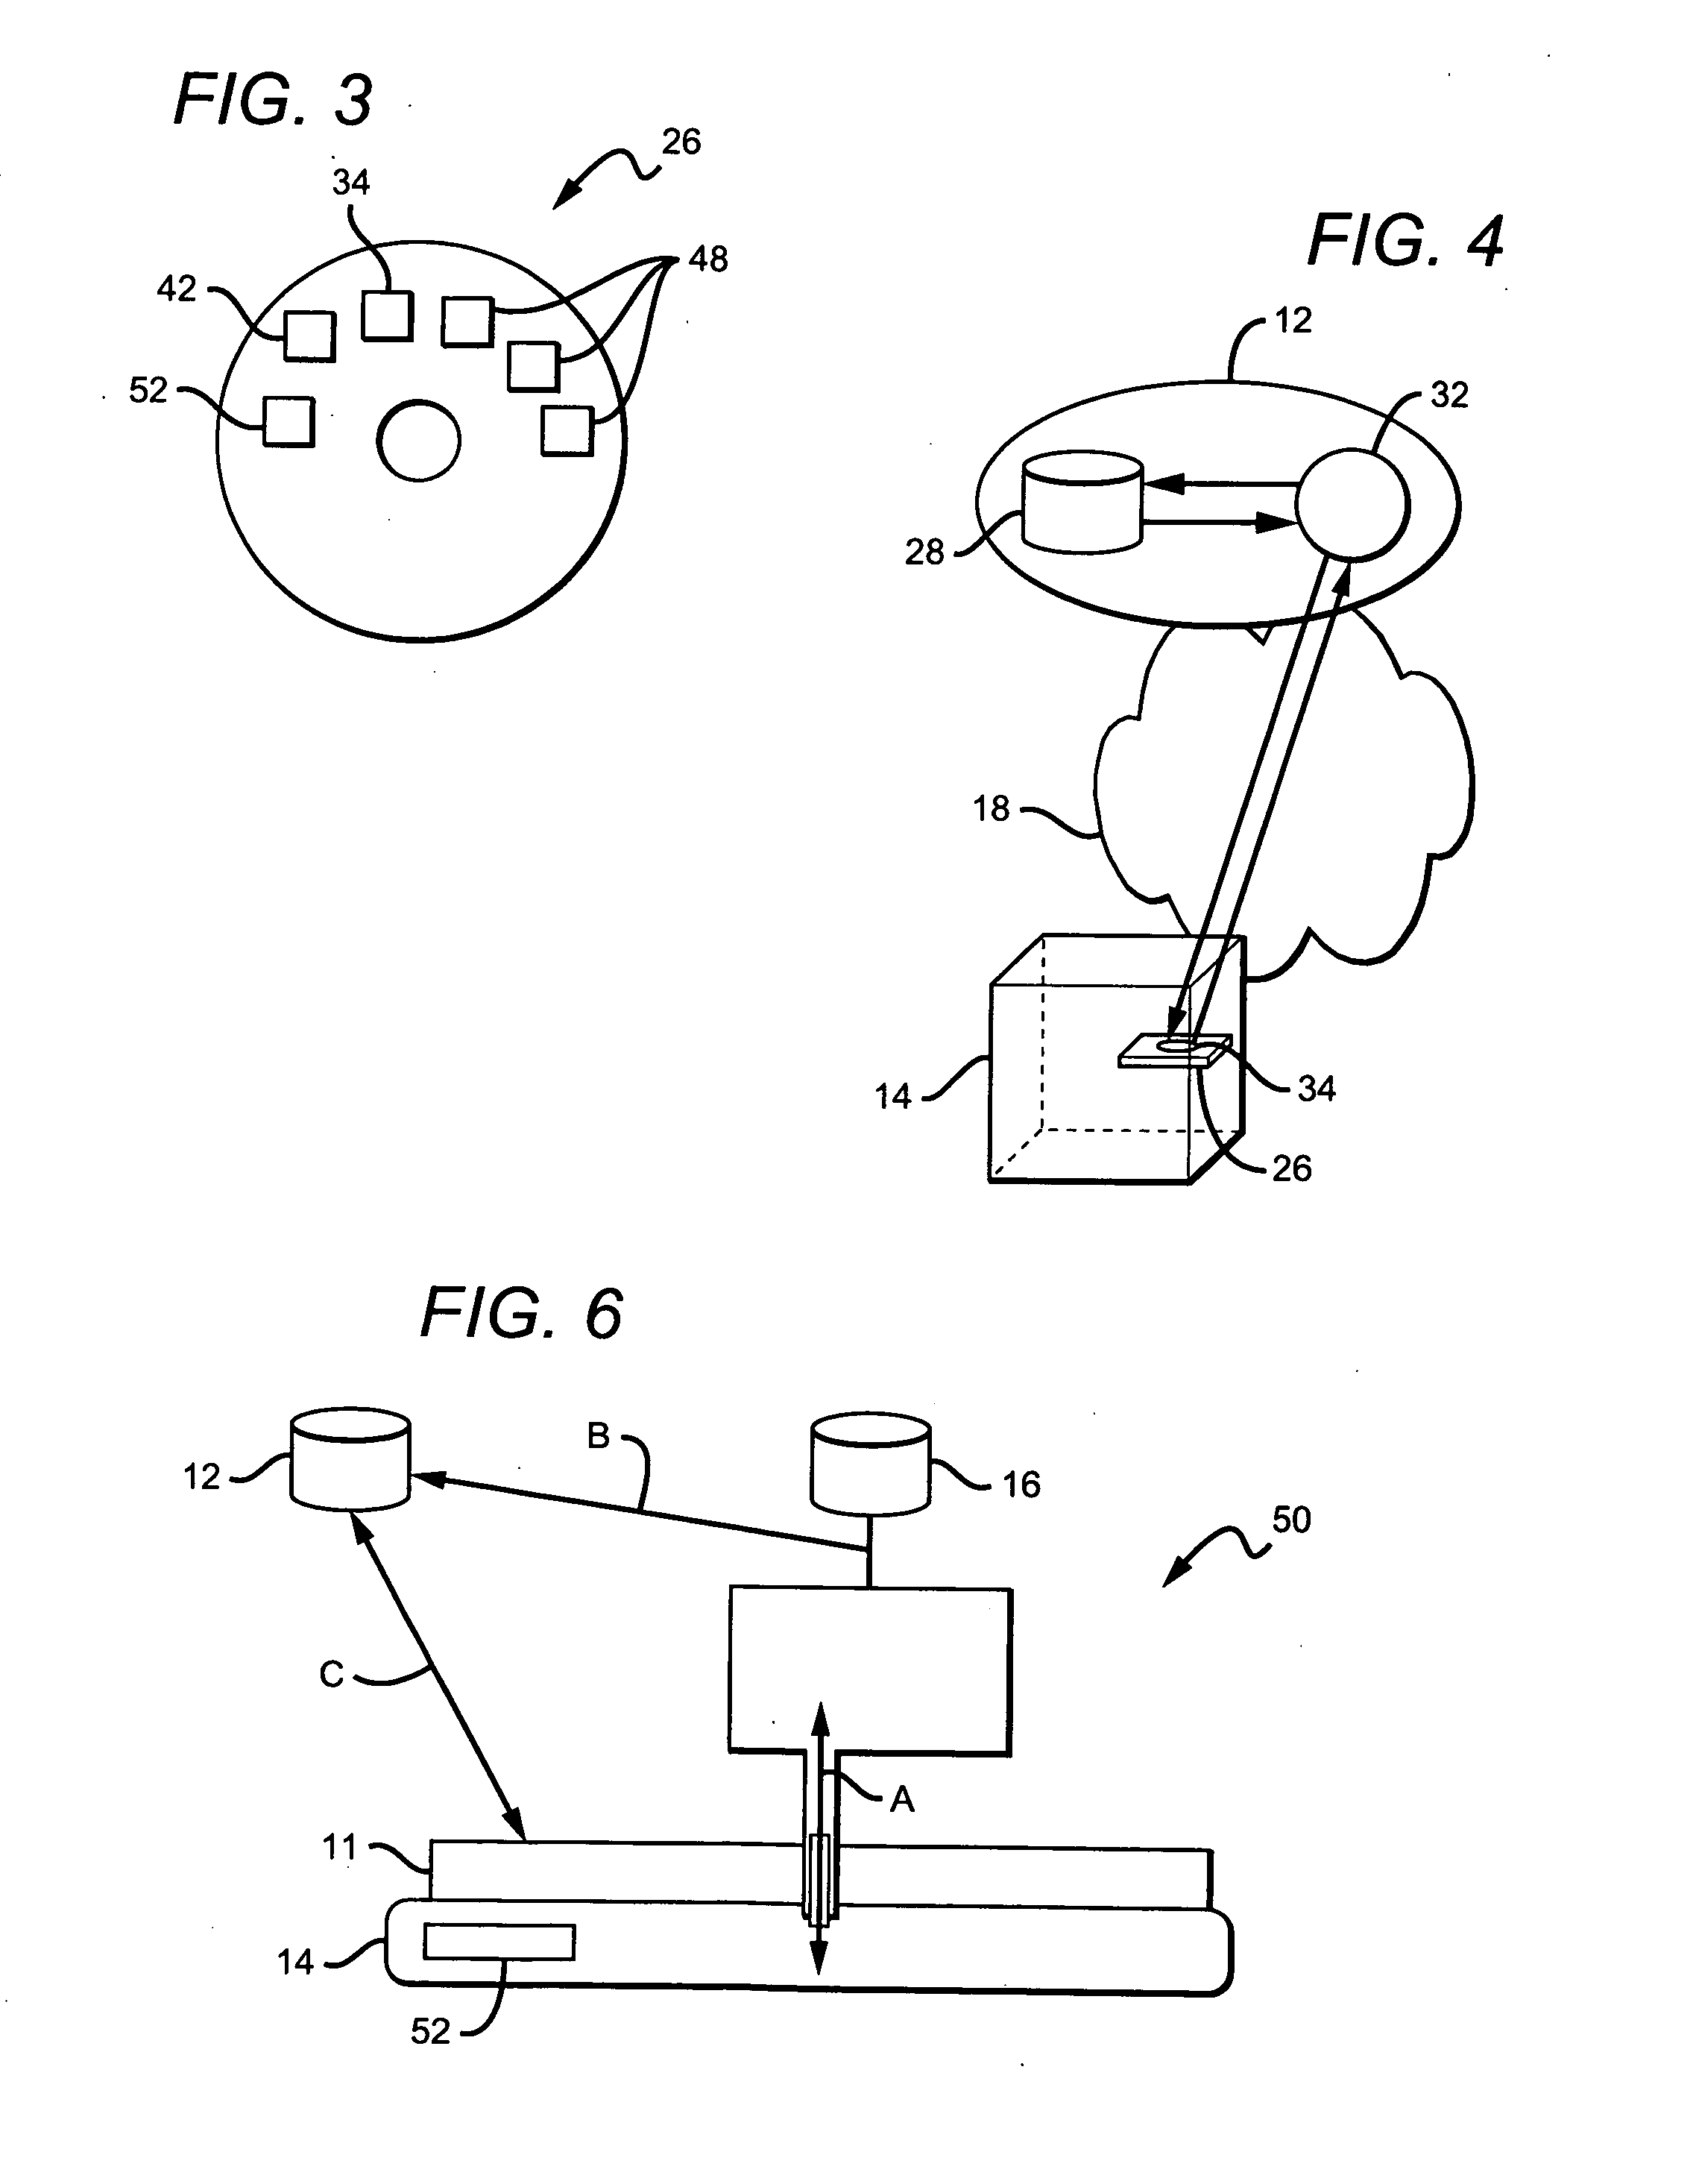 Digital publication system and apparatus